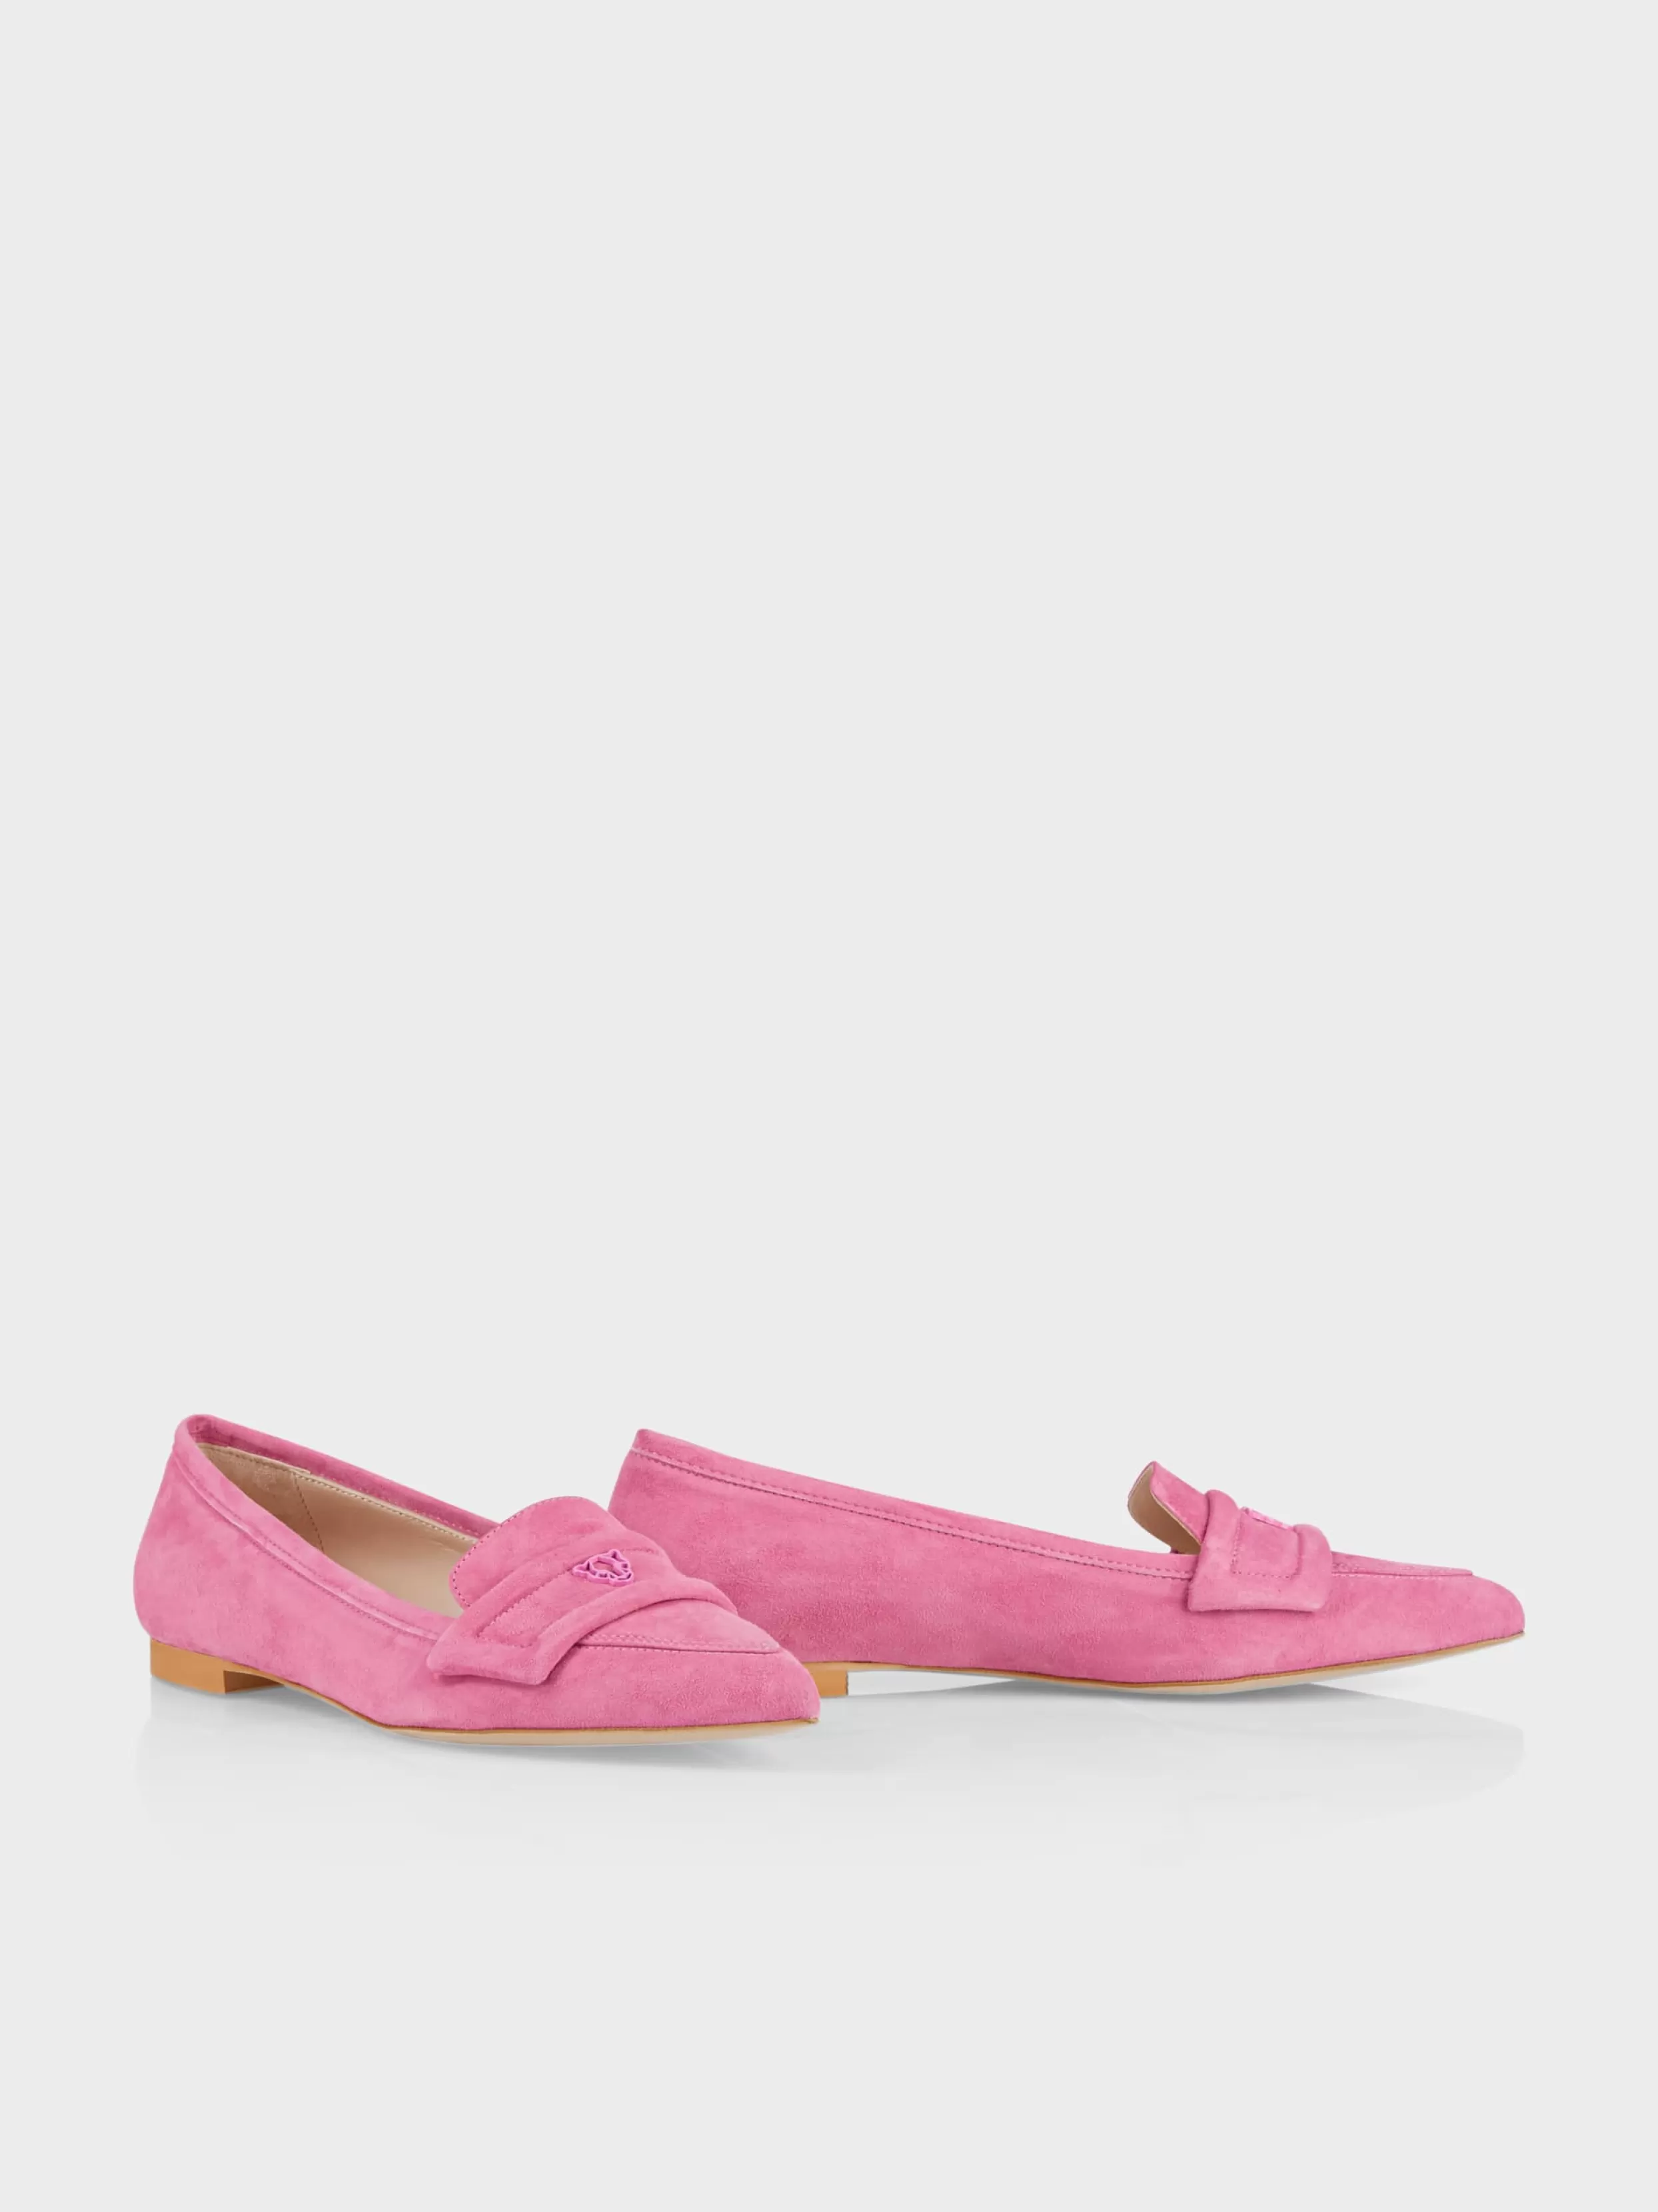 Marc Cain "Rethink Together" flat loafers | Shoes